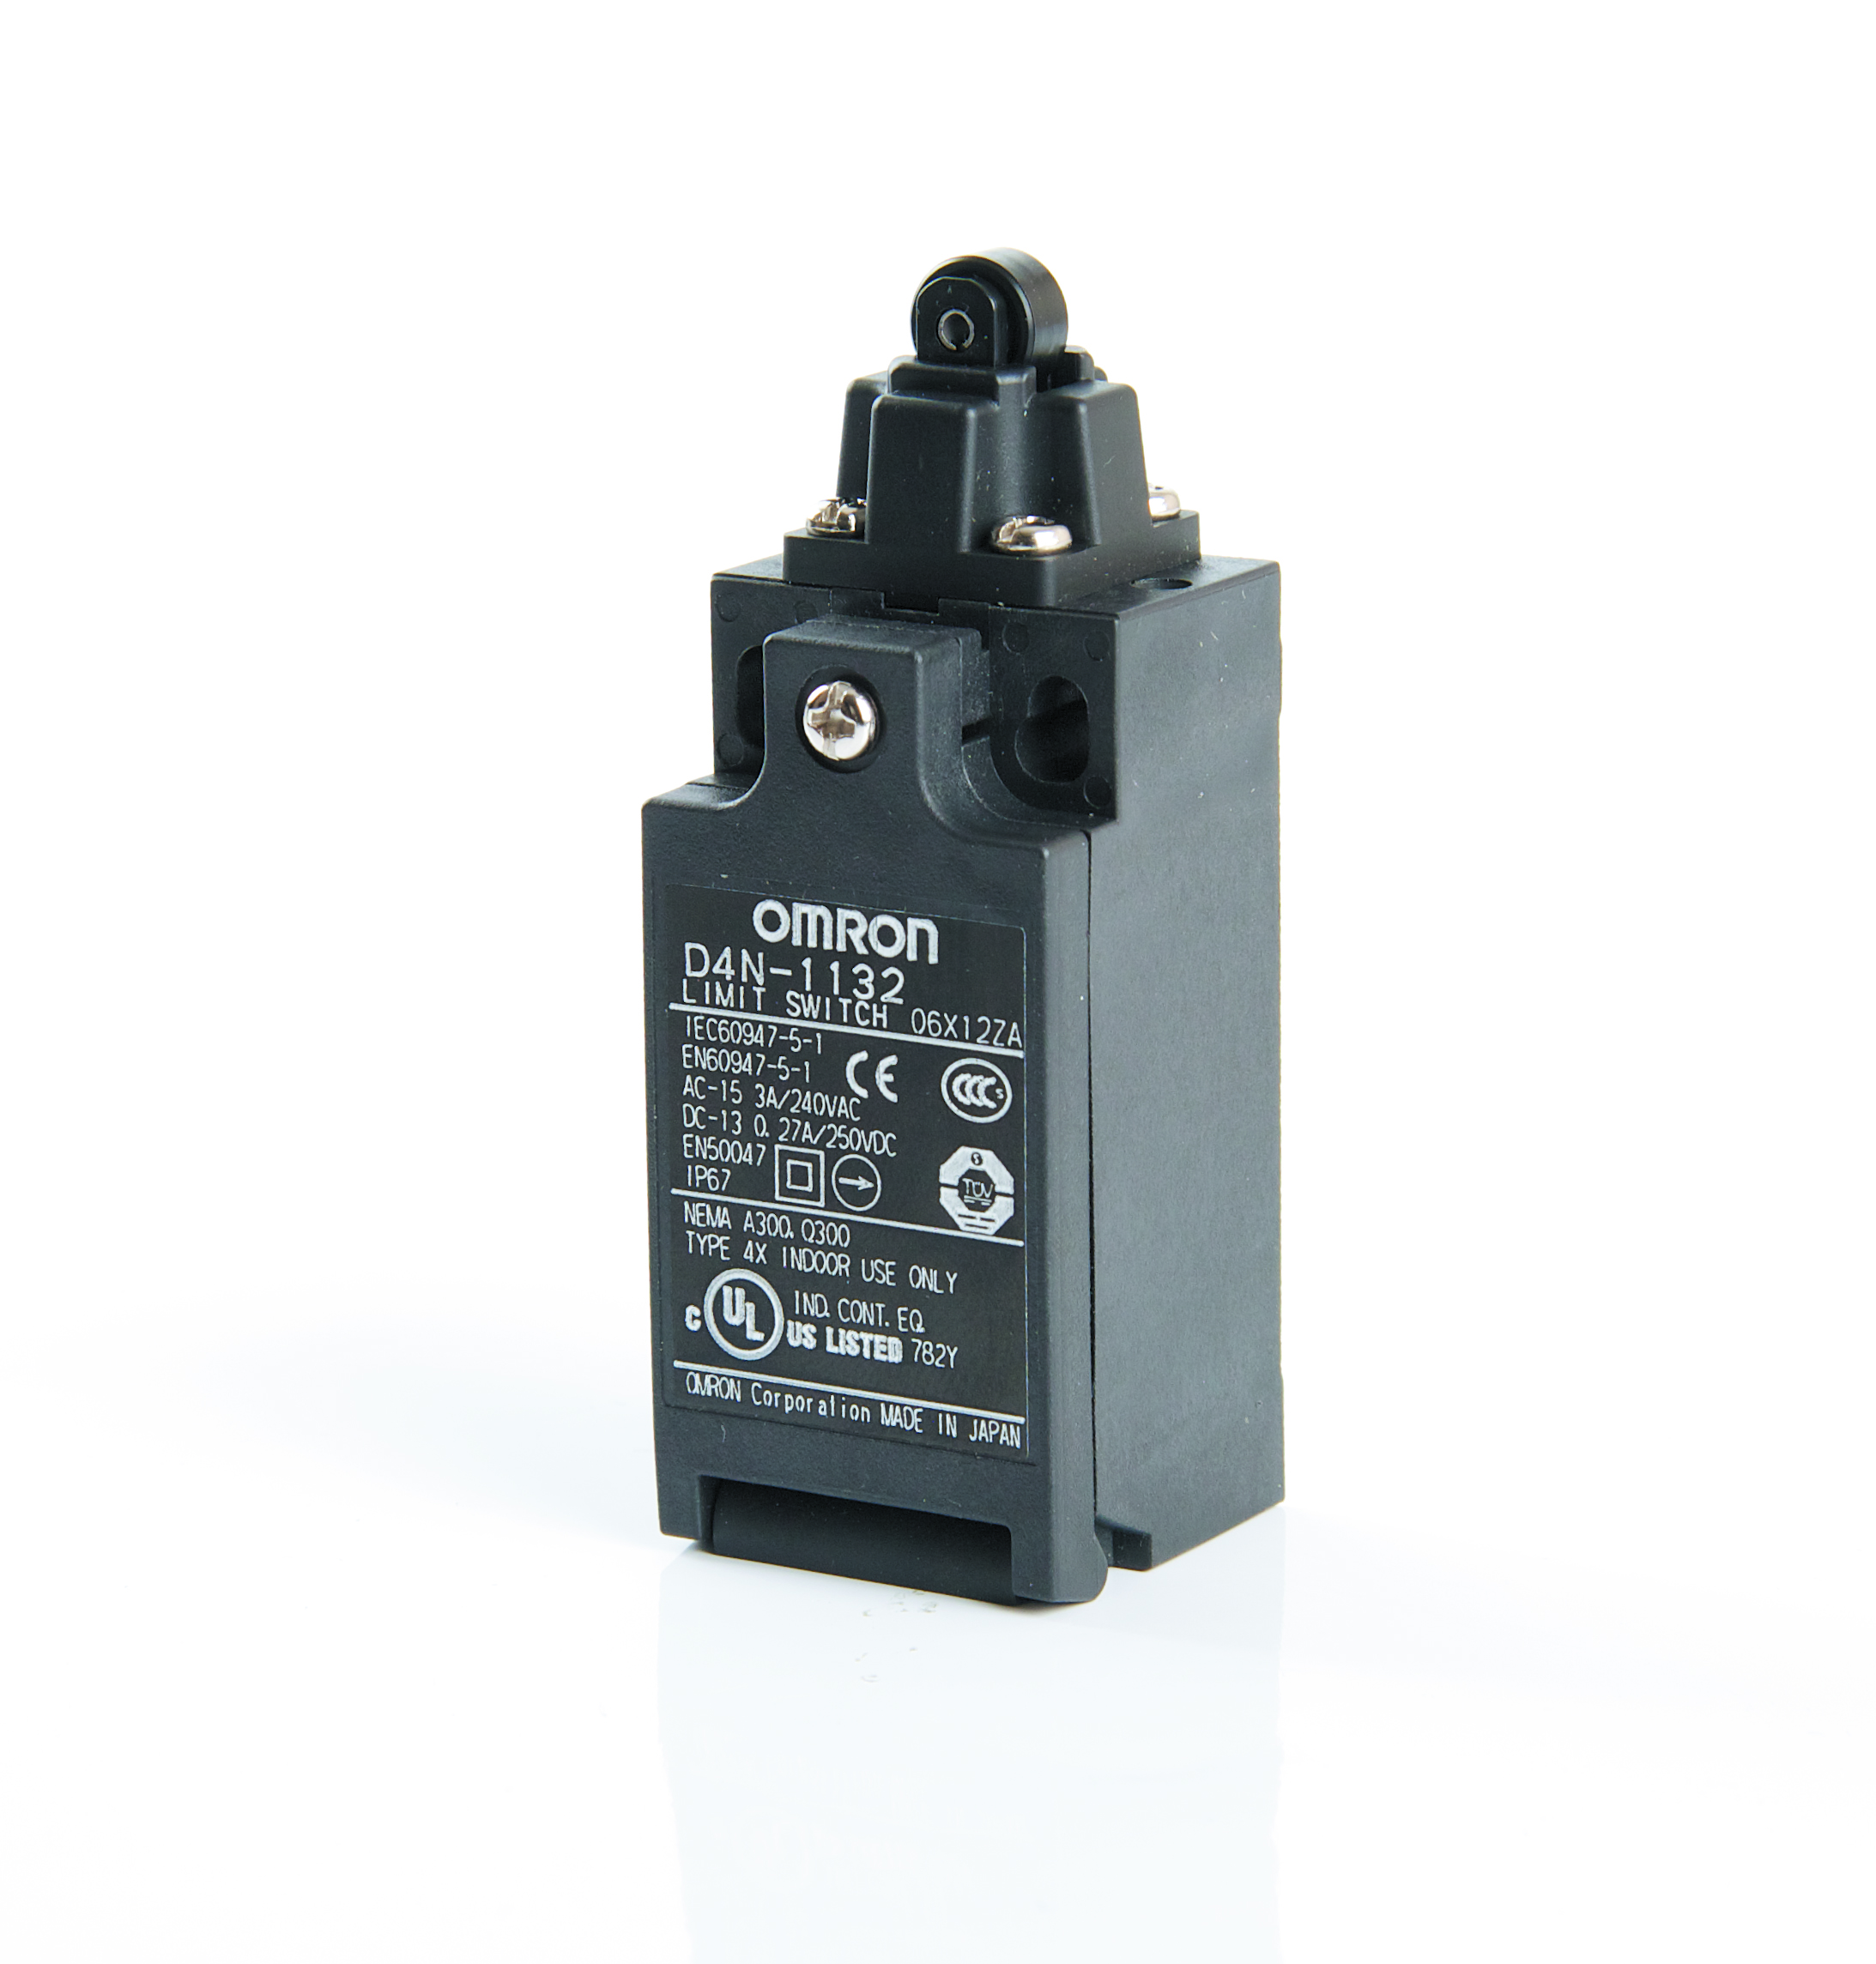 Microswitch D4N-1132 Limit Switch C/W Roller